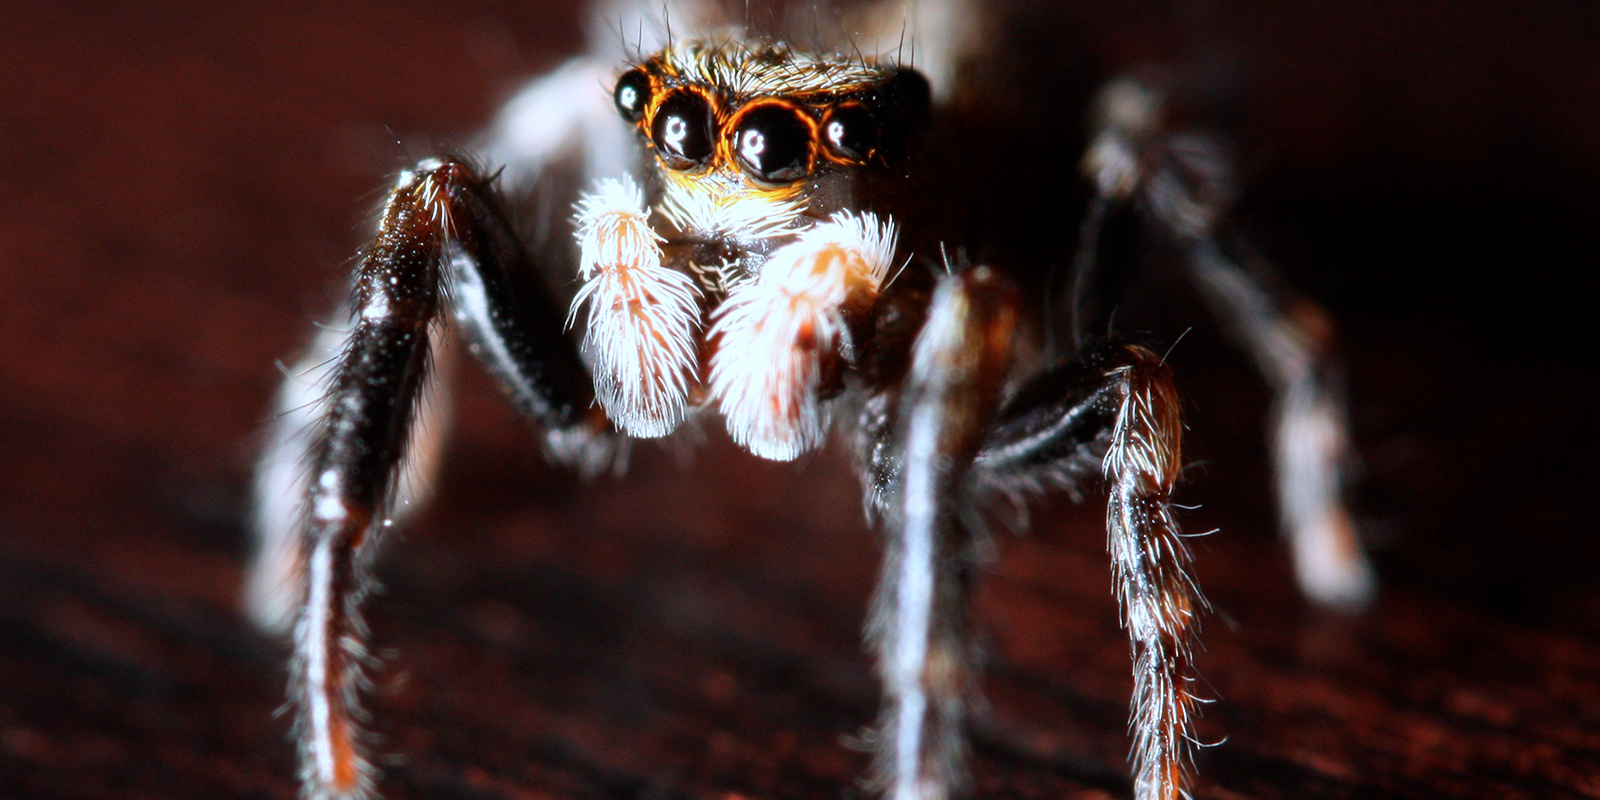 A close up view of the front of a live male spider